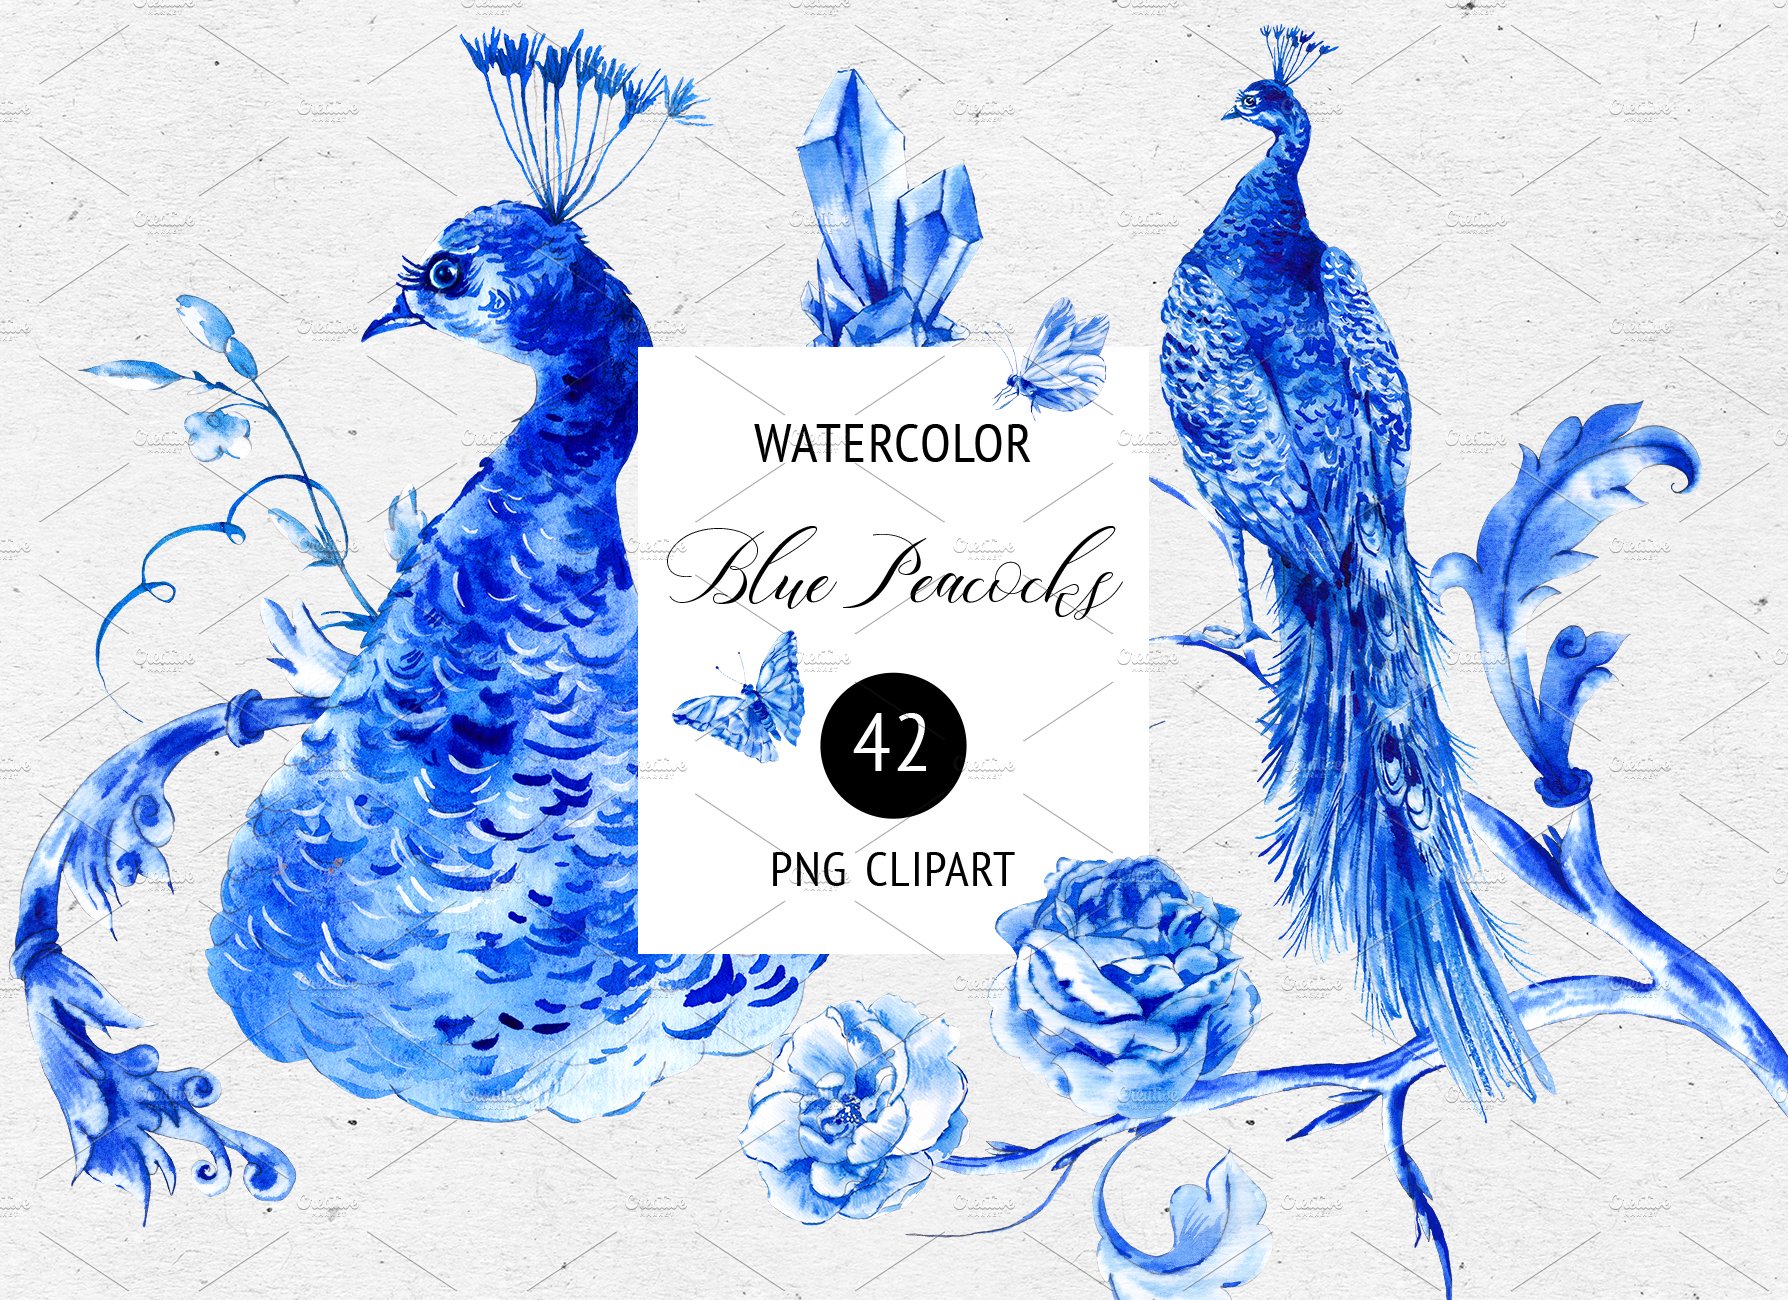 Blue watercolor flowers and peacock cover image.